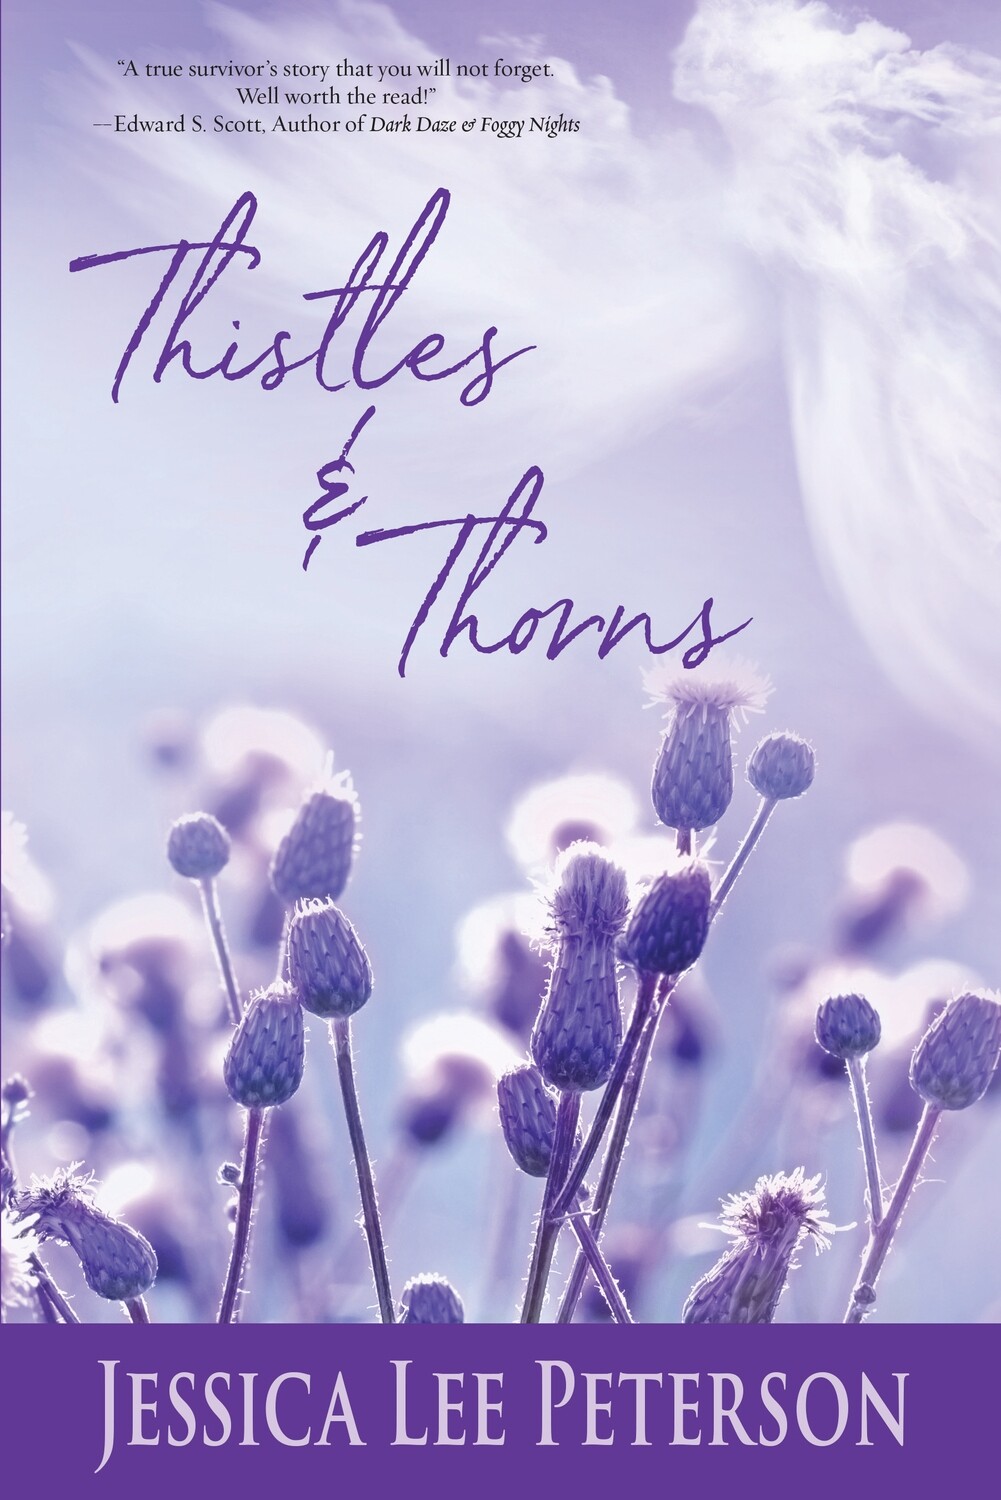 Thistles & Thorns by Jessica Lee Peterson